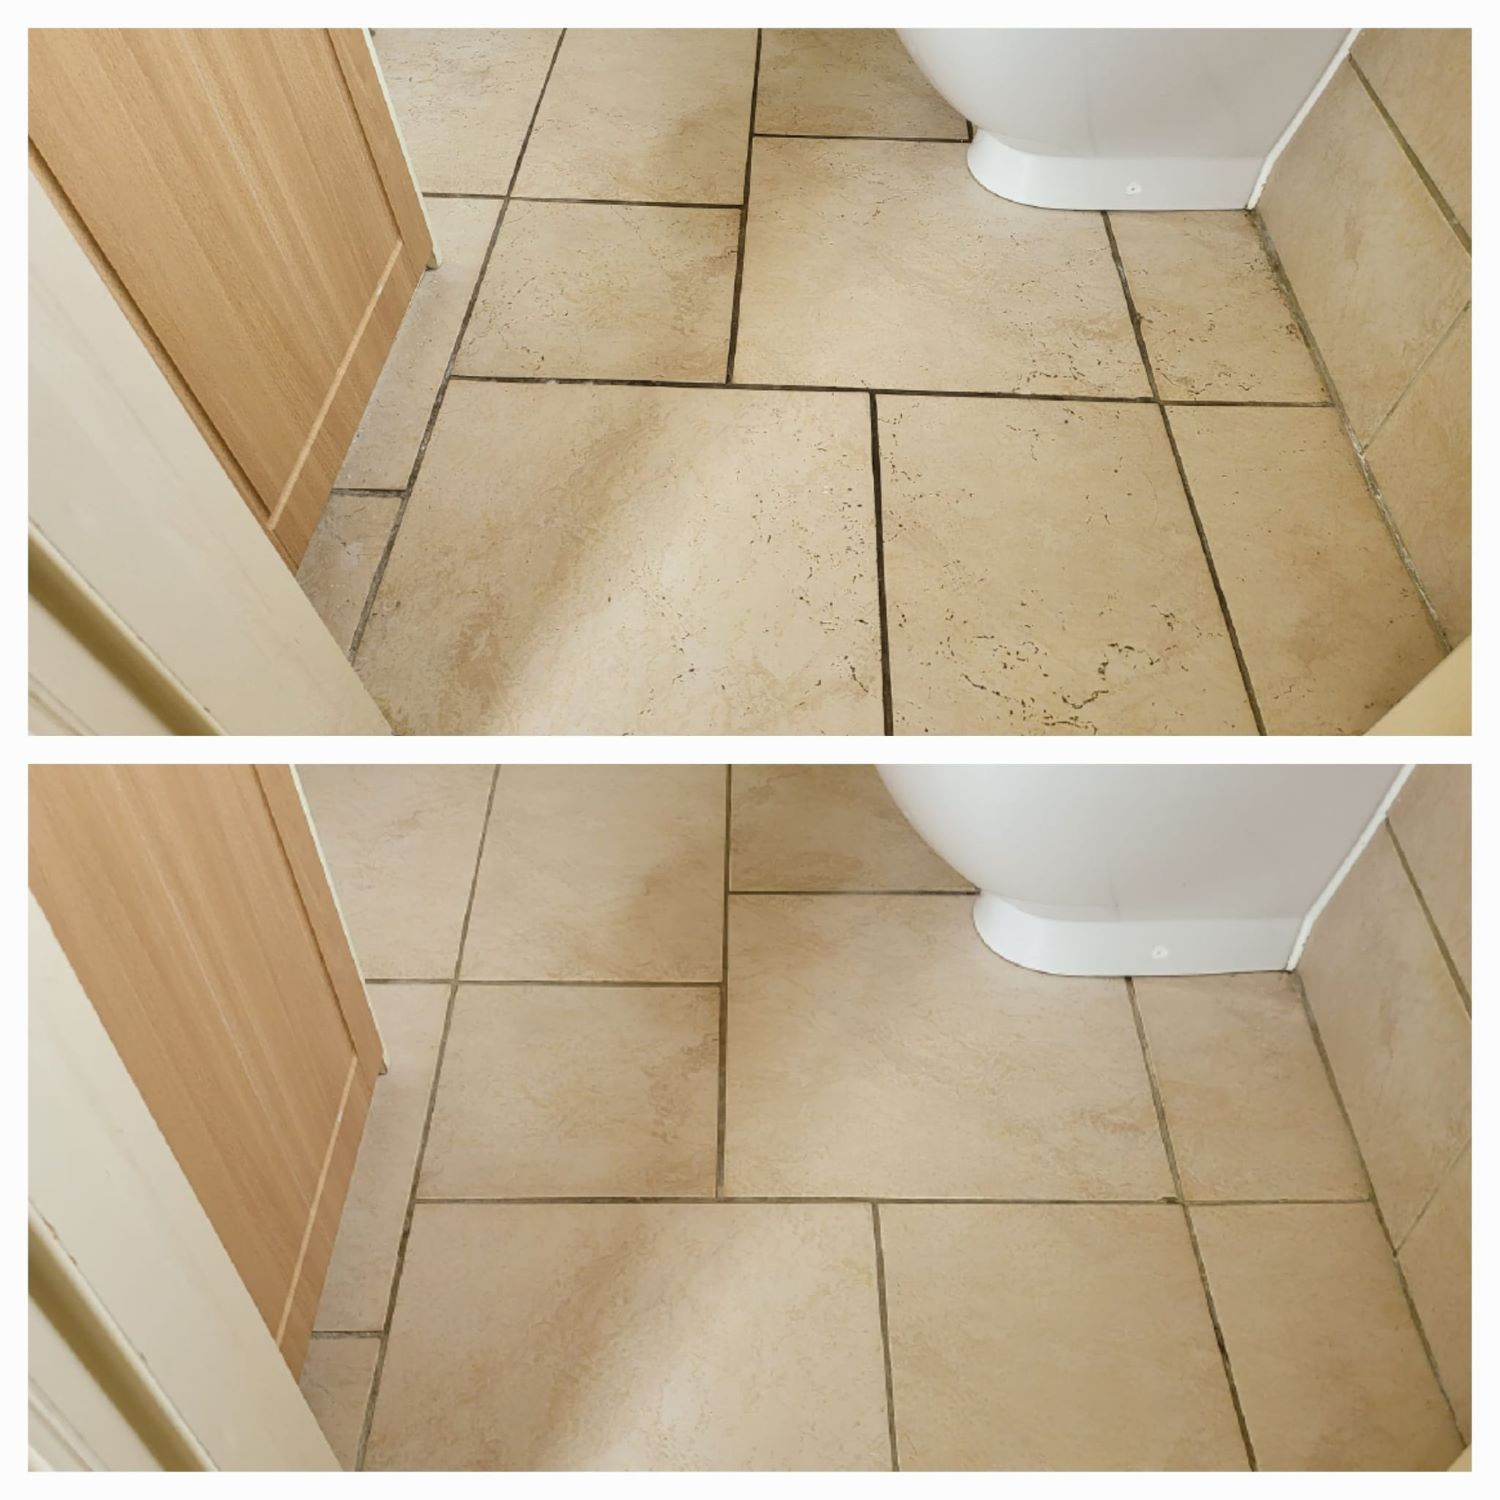 Toilet floor, before and after clean